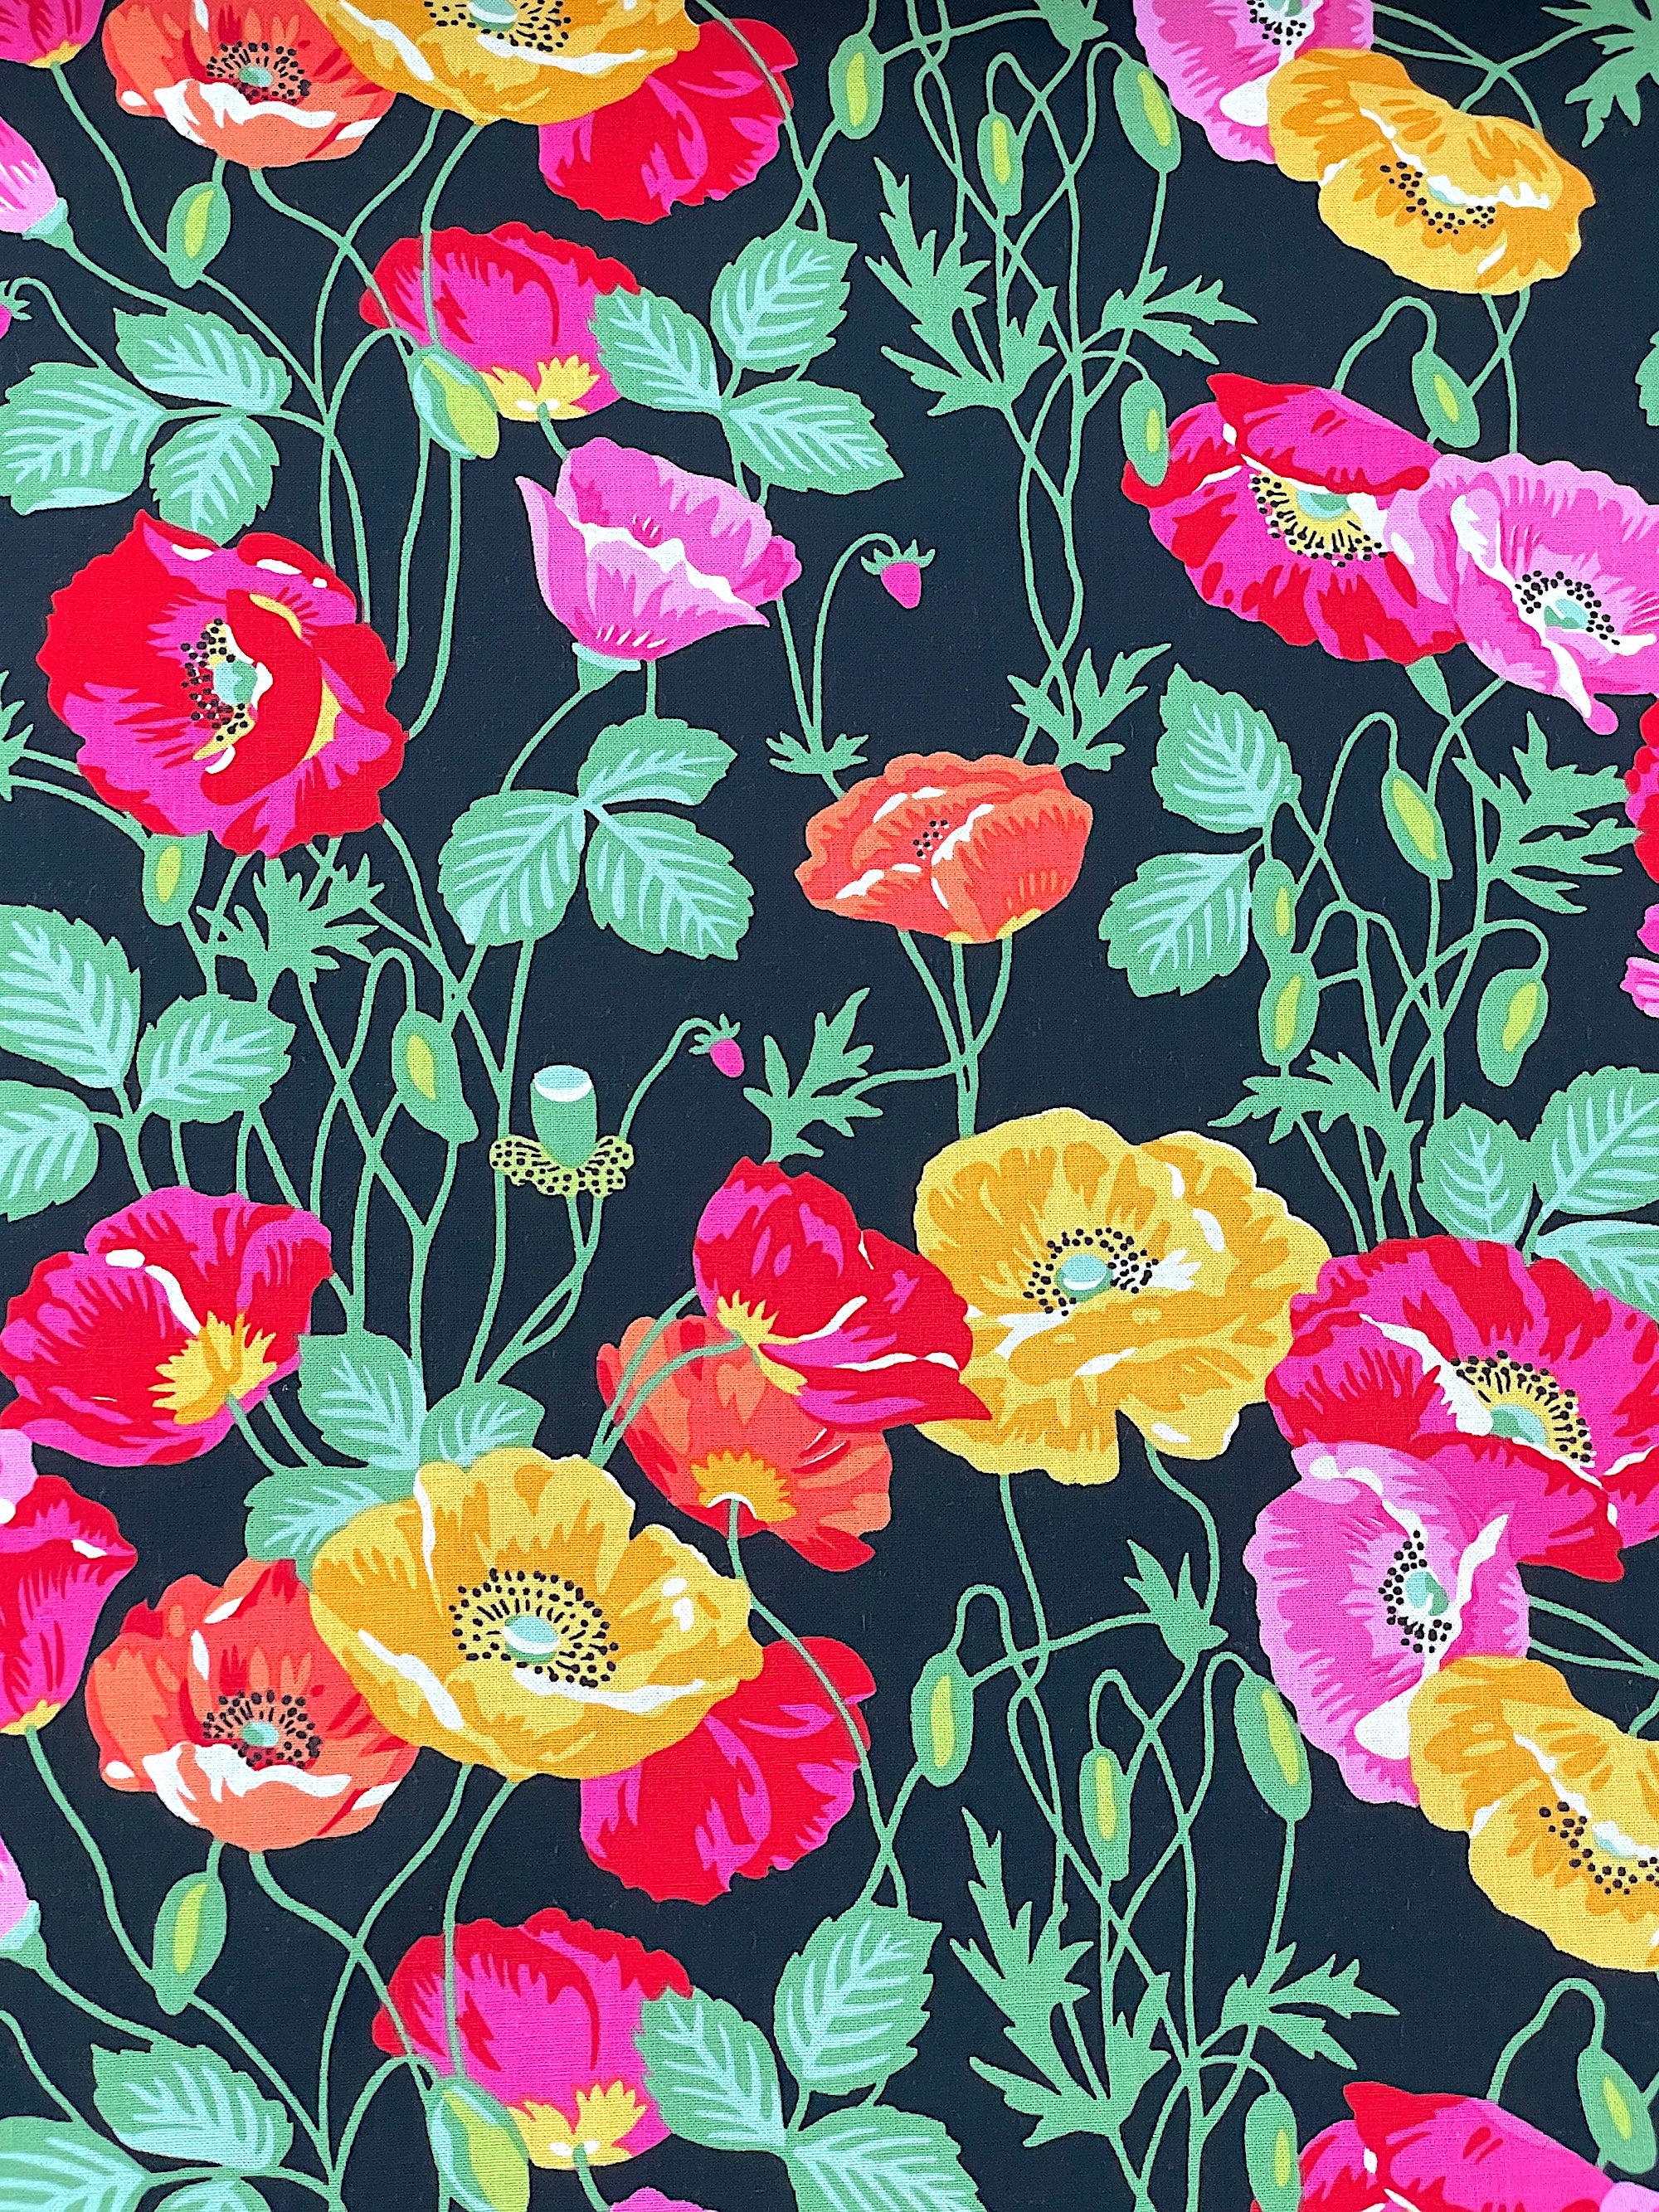 This black&nbsp; cotton fabric is covered with red, orange, pink and yellow poppies and green leaves and stems.